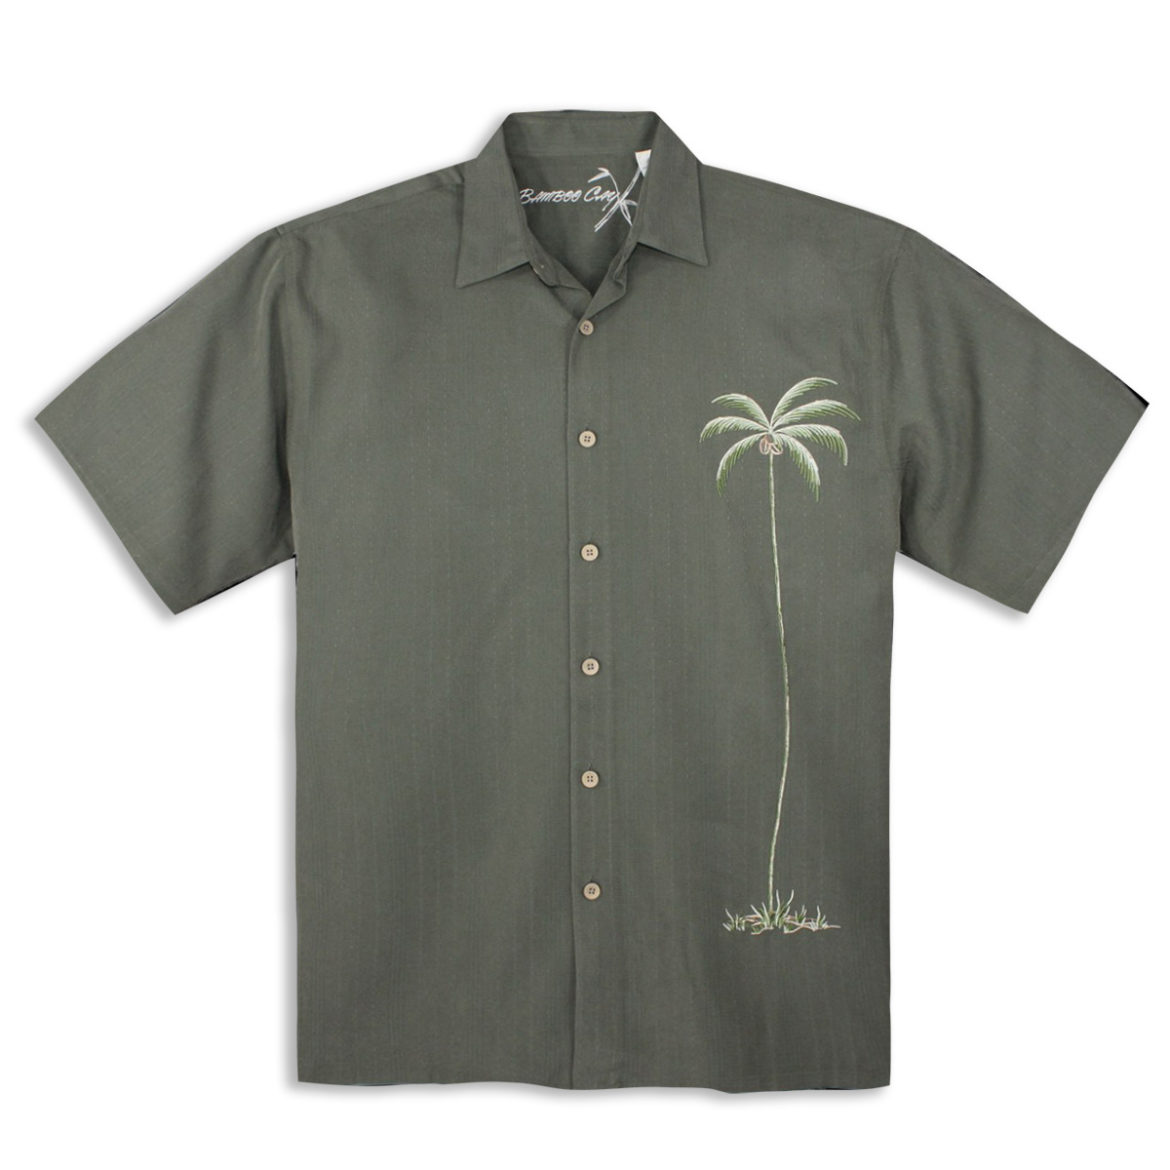 Mens Tropical Resortwear Shirt - Bamboo Cay - Tranquility - Olive - Easy-care fabric perfect for Vacation or Night out.